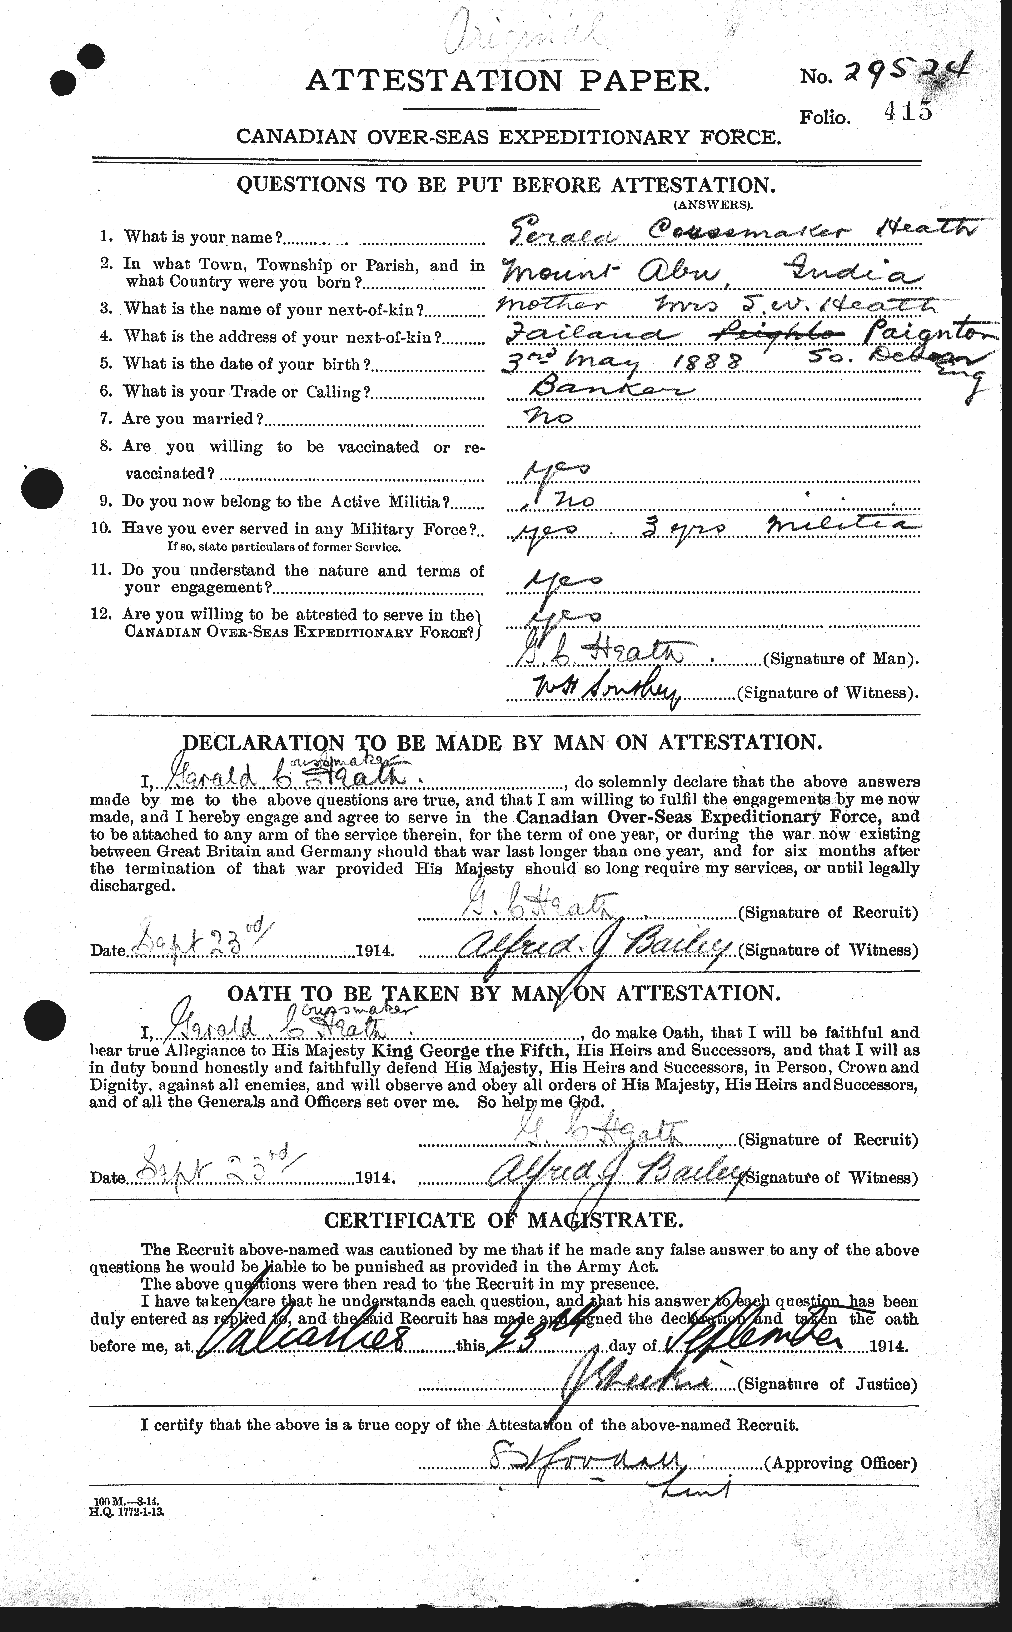 Personnel Records of the First World War - CEF 386260a